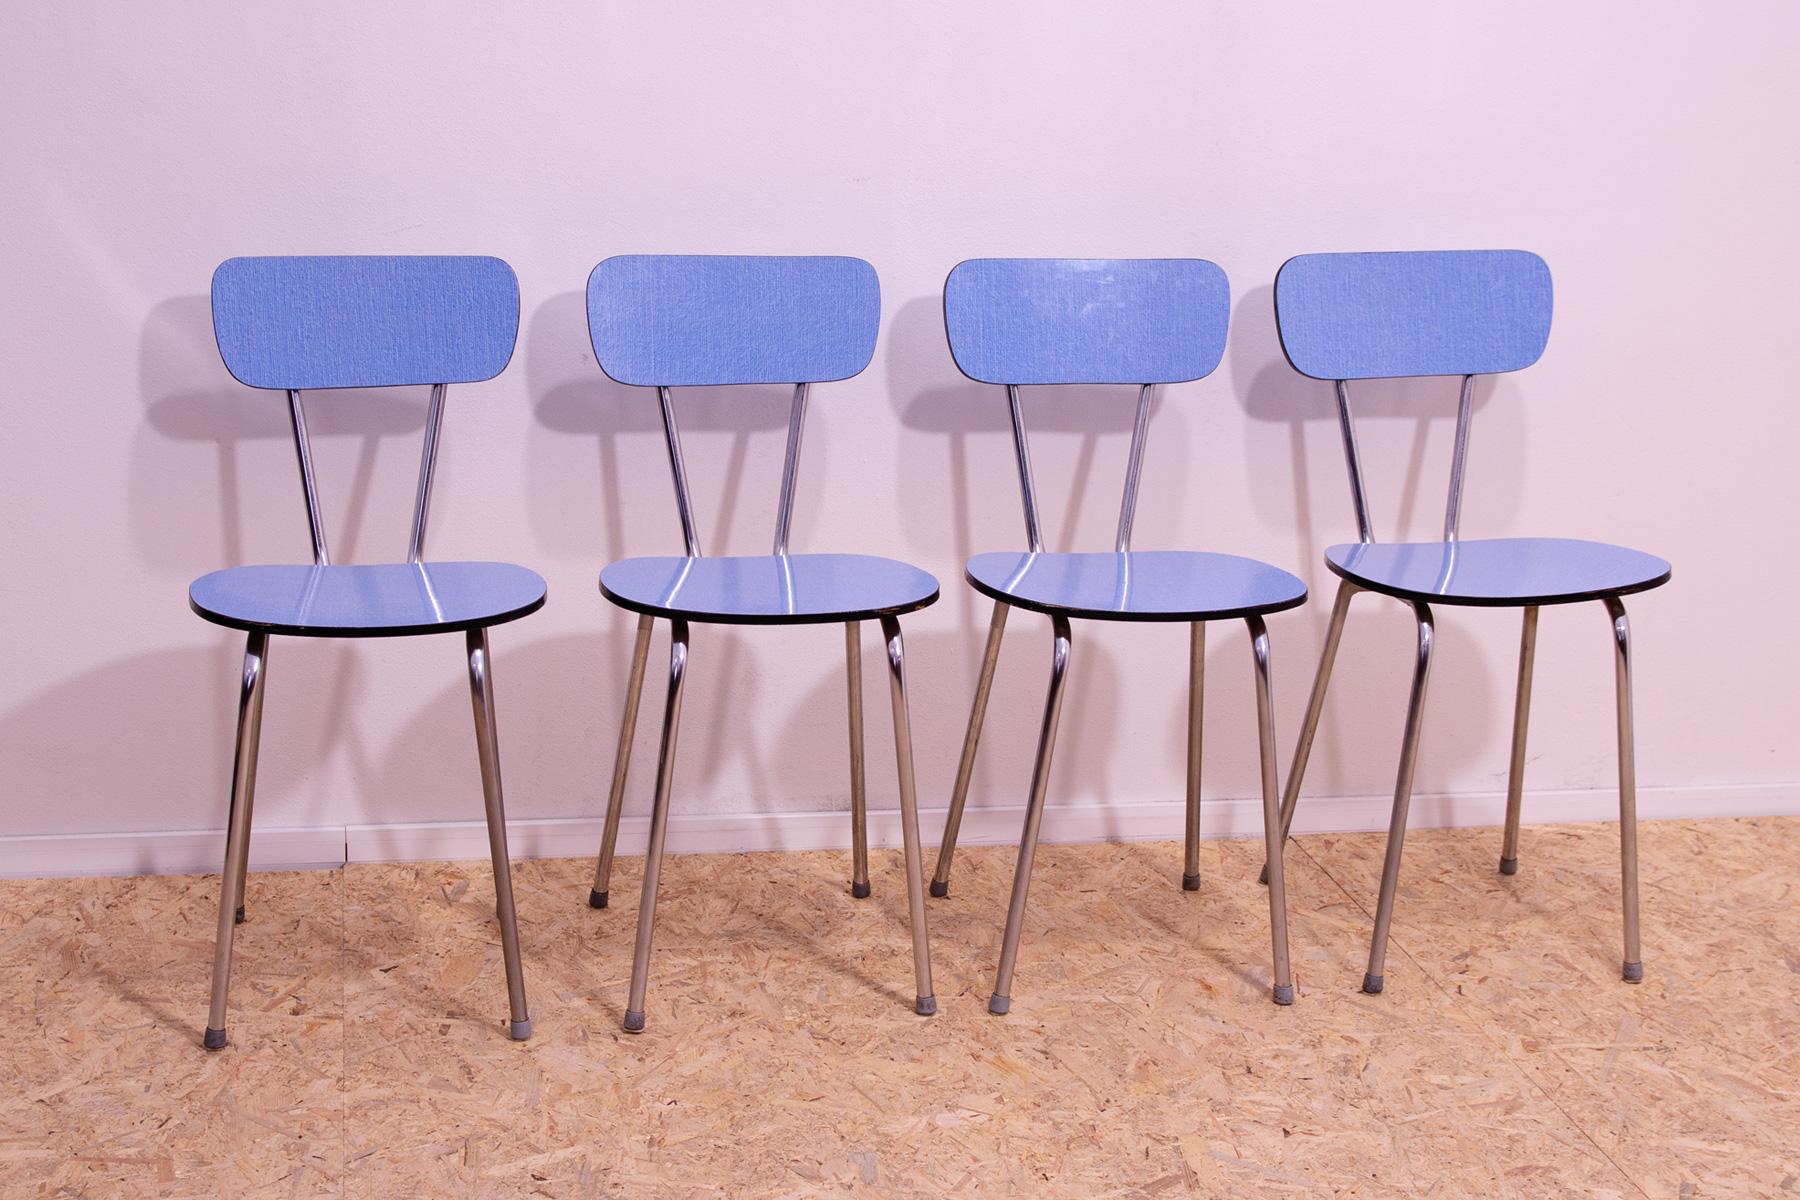 Mid-century color formica cafe or dining chairs with chrome legs. They were made by Kovona company in the former Czechoslovakia in the 1960’s. In good Vintage condition, shows signs of age and using. Price is for the set of 4.

Height: 80 cm

Width: